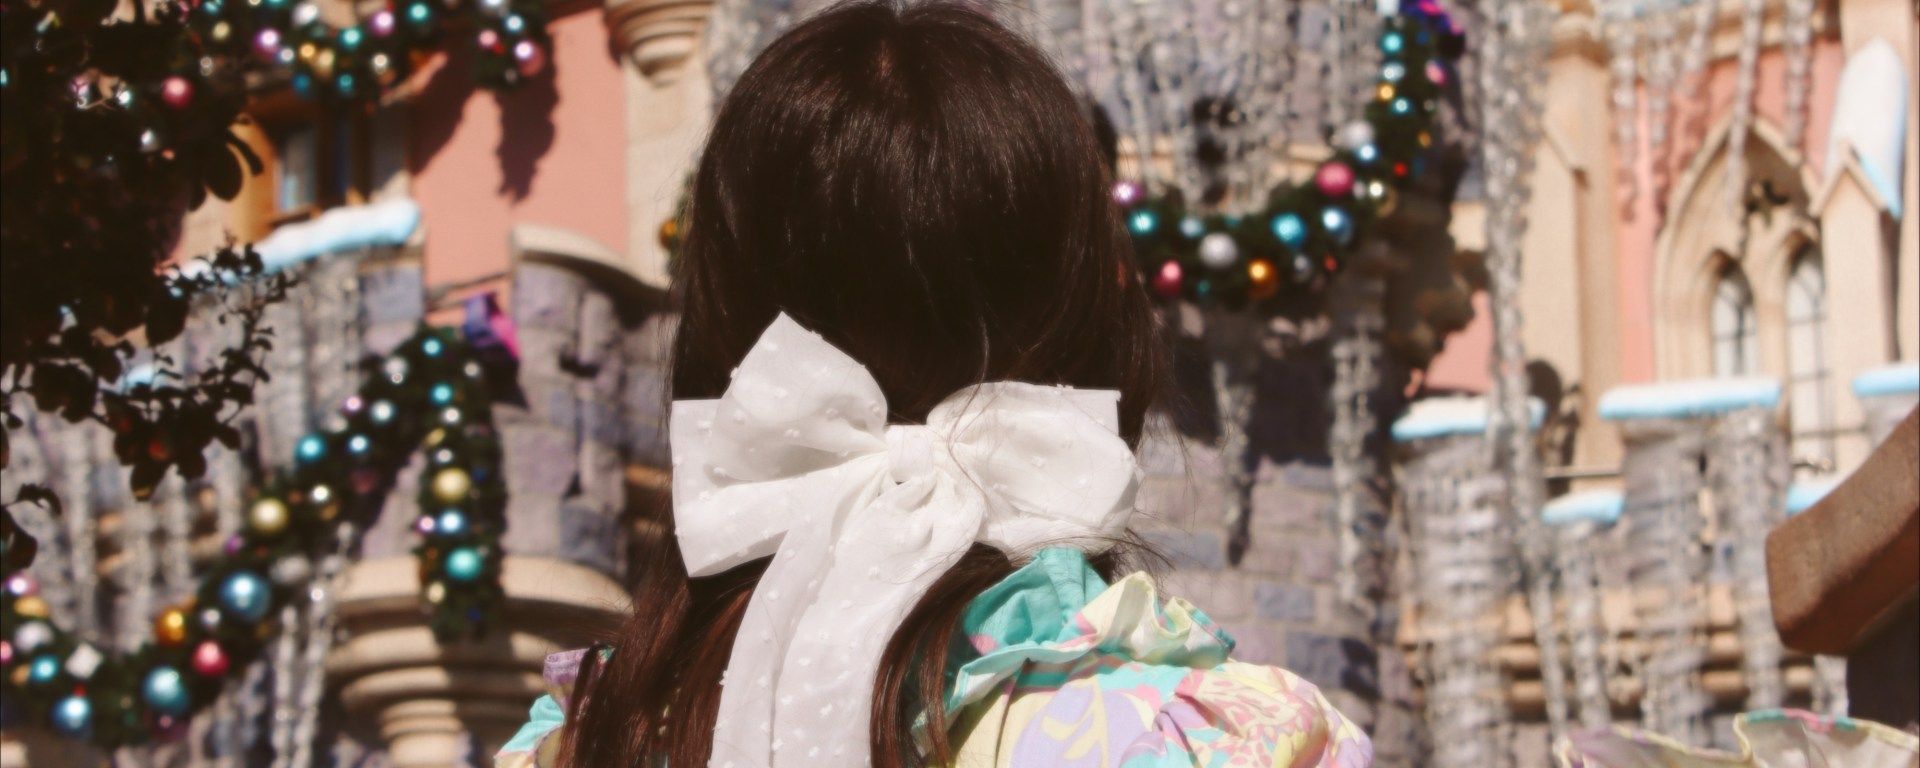 How to dress like a princess at Disneyland (as an adult)